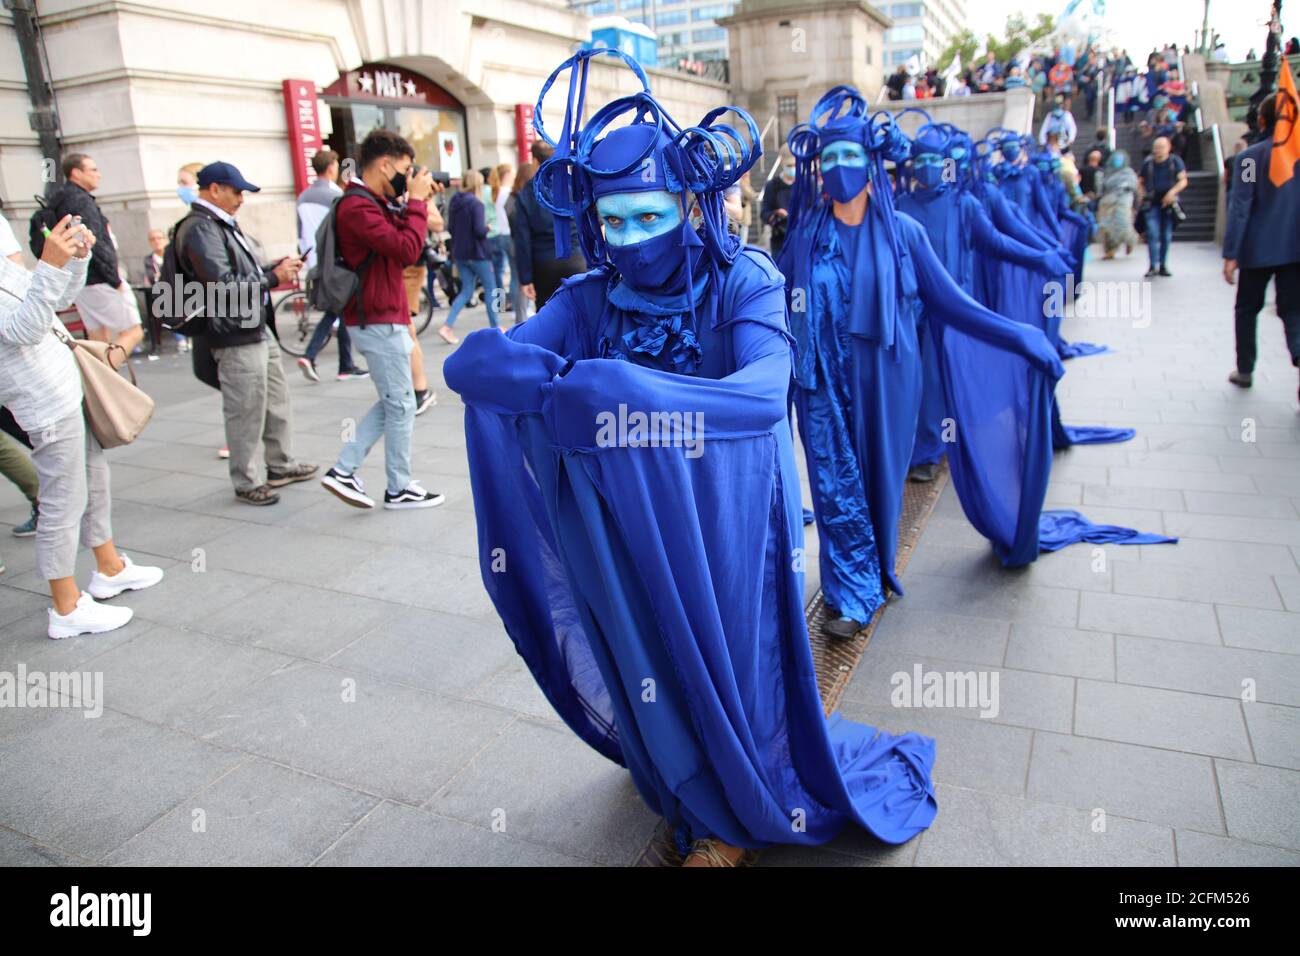 London, UK. 06th Sep, 2020. Extinction Rebellion protestors march from Parliament Square to Tate Modern to highlight the dangers to marine life from global warming and climate change, 6th September 2020. Protestors dressed in blue referred to as 'the wave' move in wave formation through the streets Credit: Denise Laura Baker/Alamy Live News Stock Photo